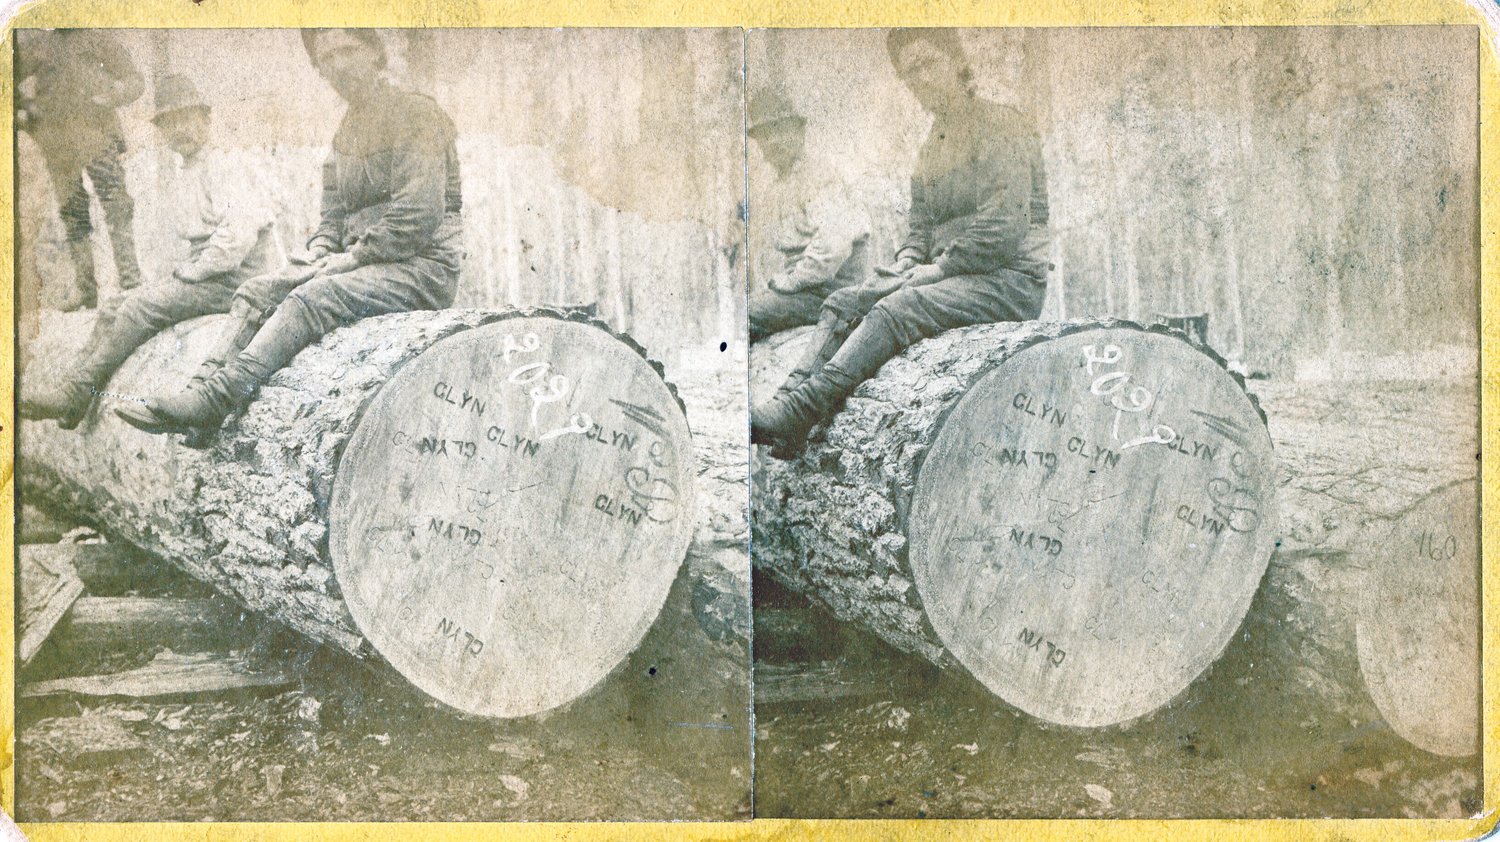 This stereo view is titled Champion Log and one of 12 in a set by Goodridge Brothers Studio of East Saginaw. Stereo views became popular as people began to use the world through photography. A stereoscopic camera has two lenses spaced approximately the distance between the human eyes apart and produces two separate photographs at the same moment. Printed and presented side-by-side and viewed in a stereo viewer a 3D image is created.